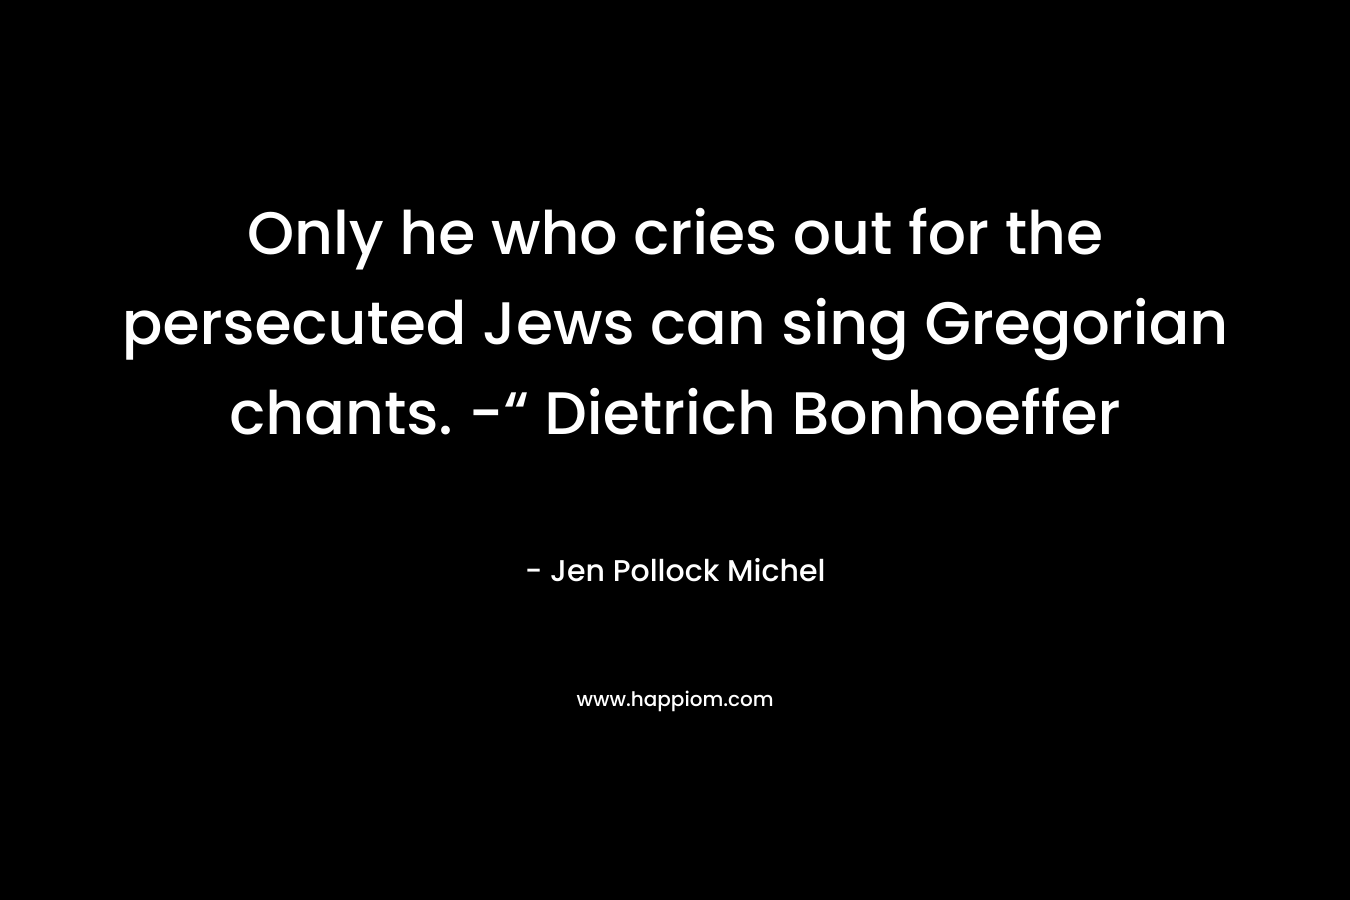 Only he who cries out for the persecuted Jews can sing Gregorian chants. -“ Dietrich Bonhoeffer